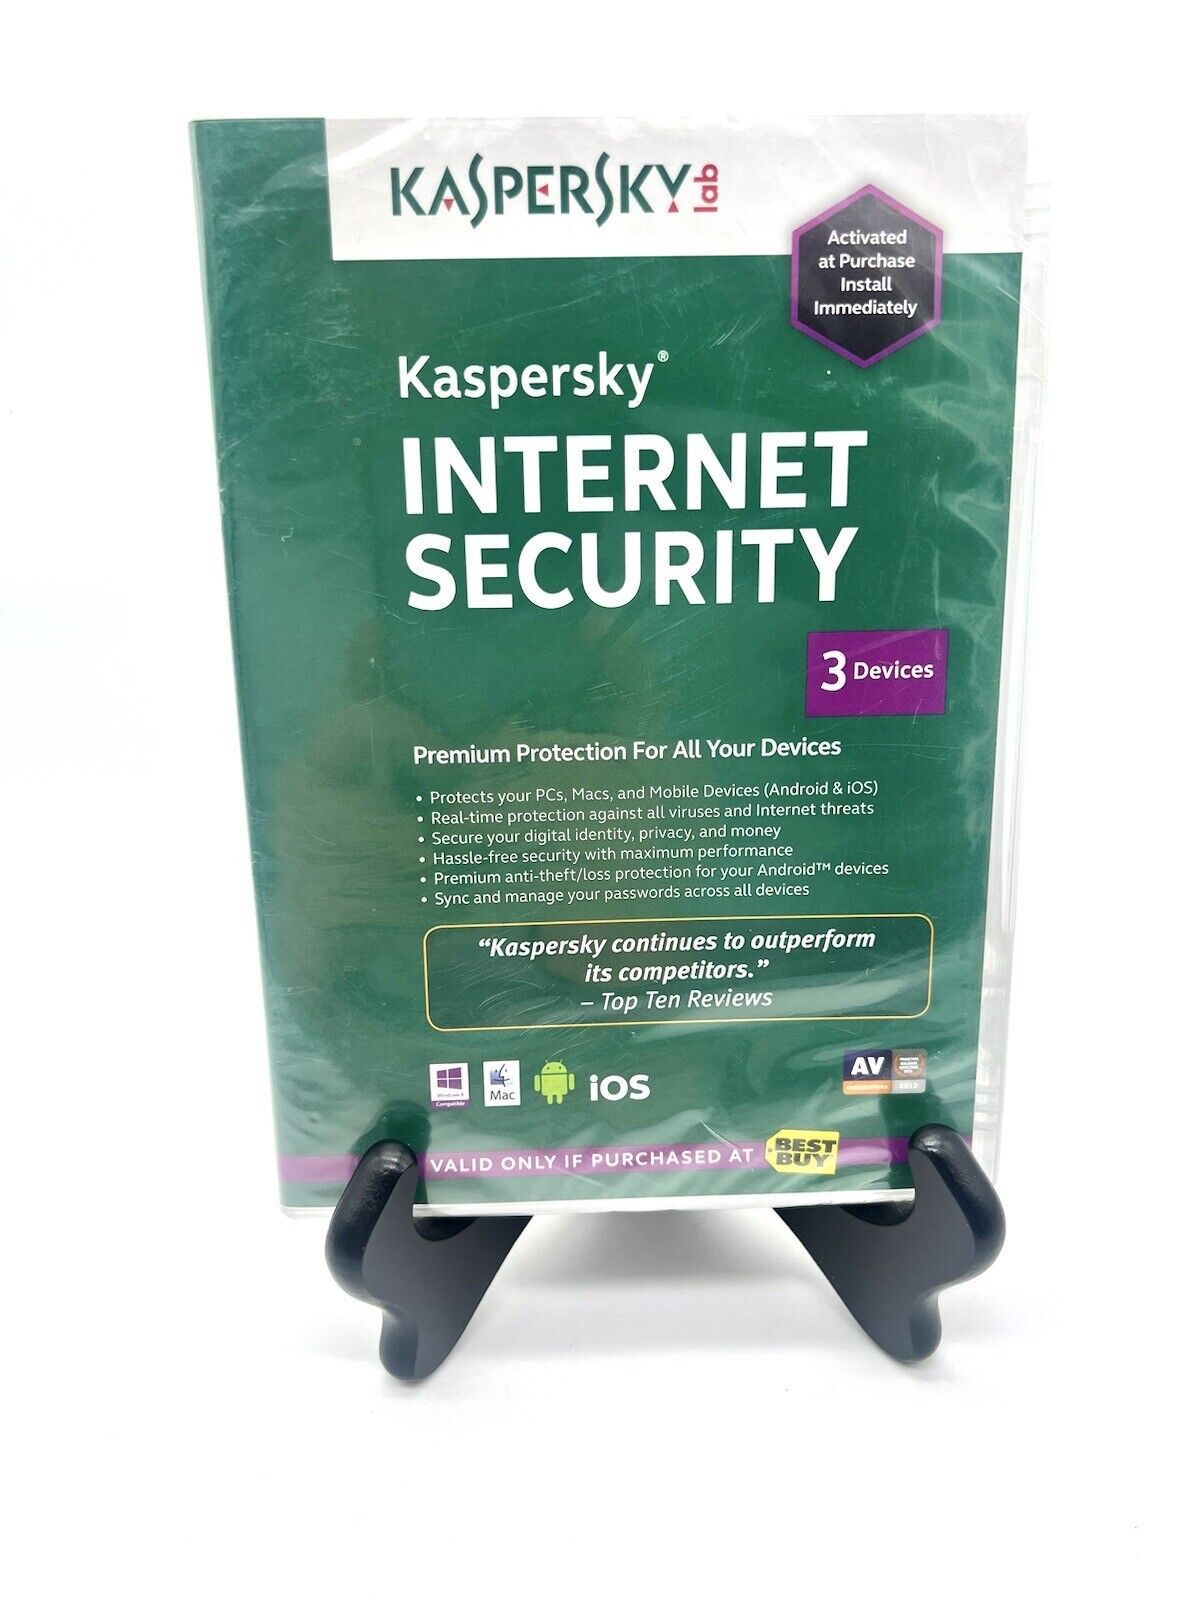 Kaspersky Internet Security 2013 PC Mac Android IOS Factory Sealed 3 Devices New